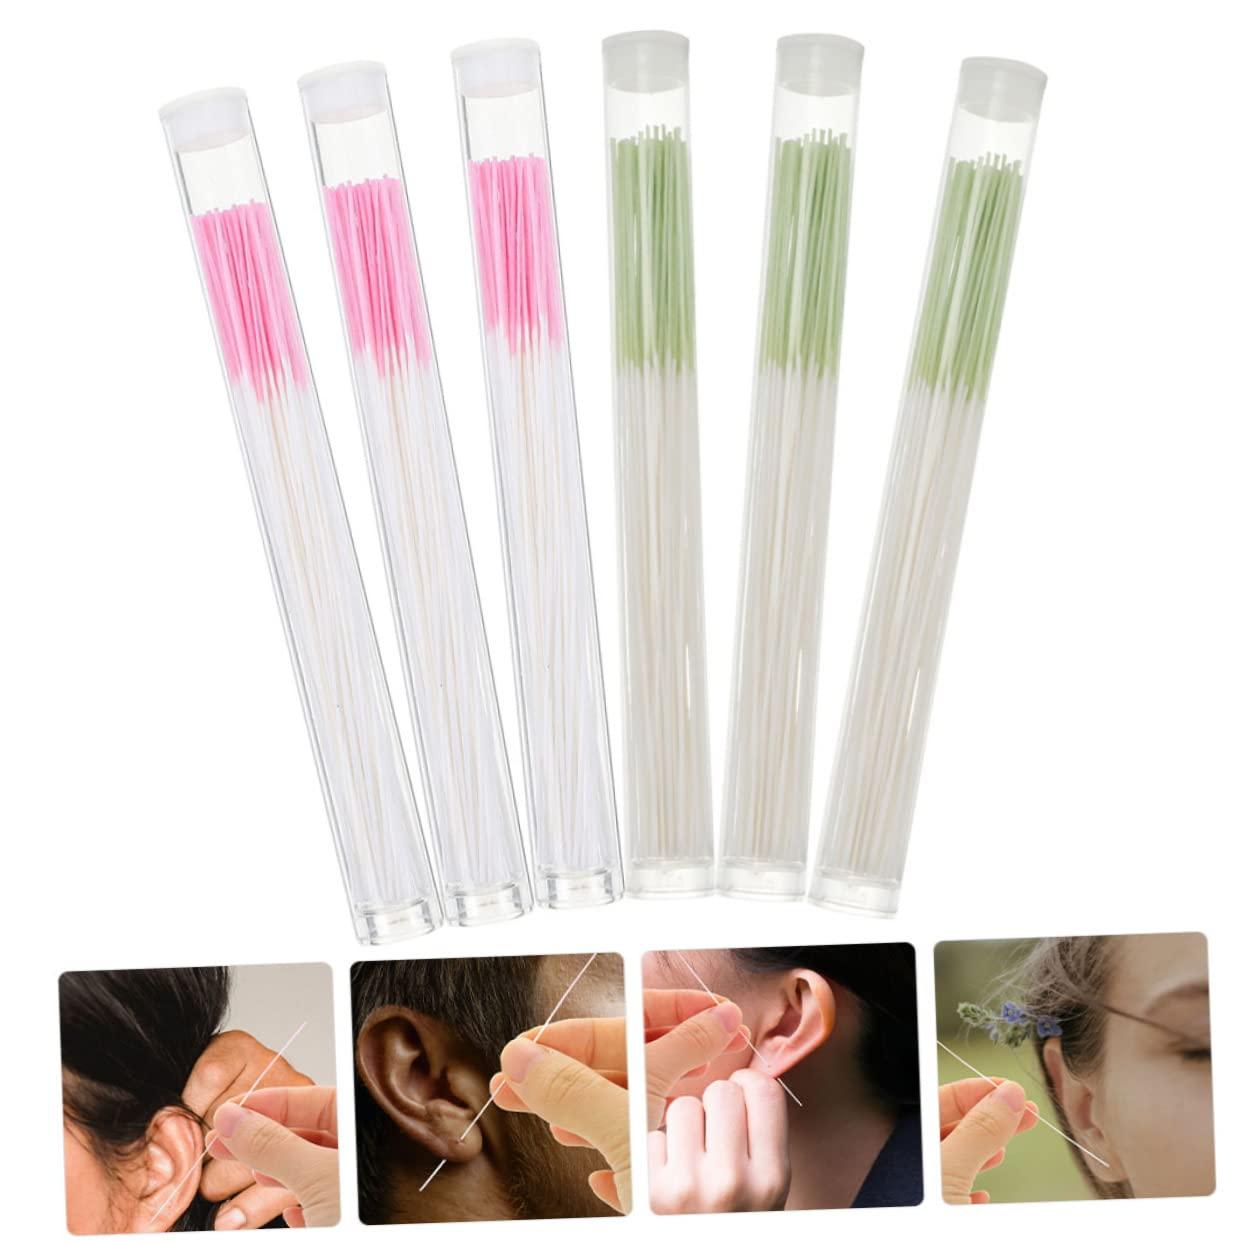  Healifty 3 Boxes Ear Piercing Cleaning line Disposable